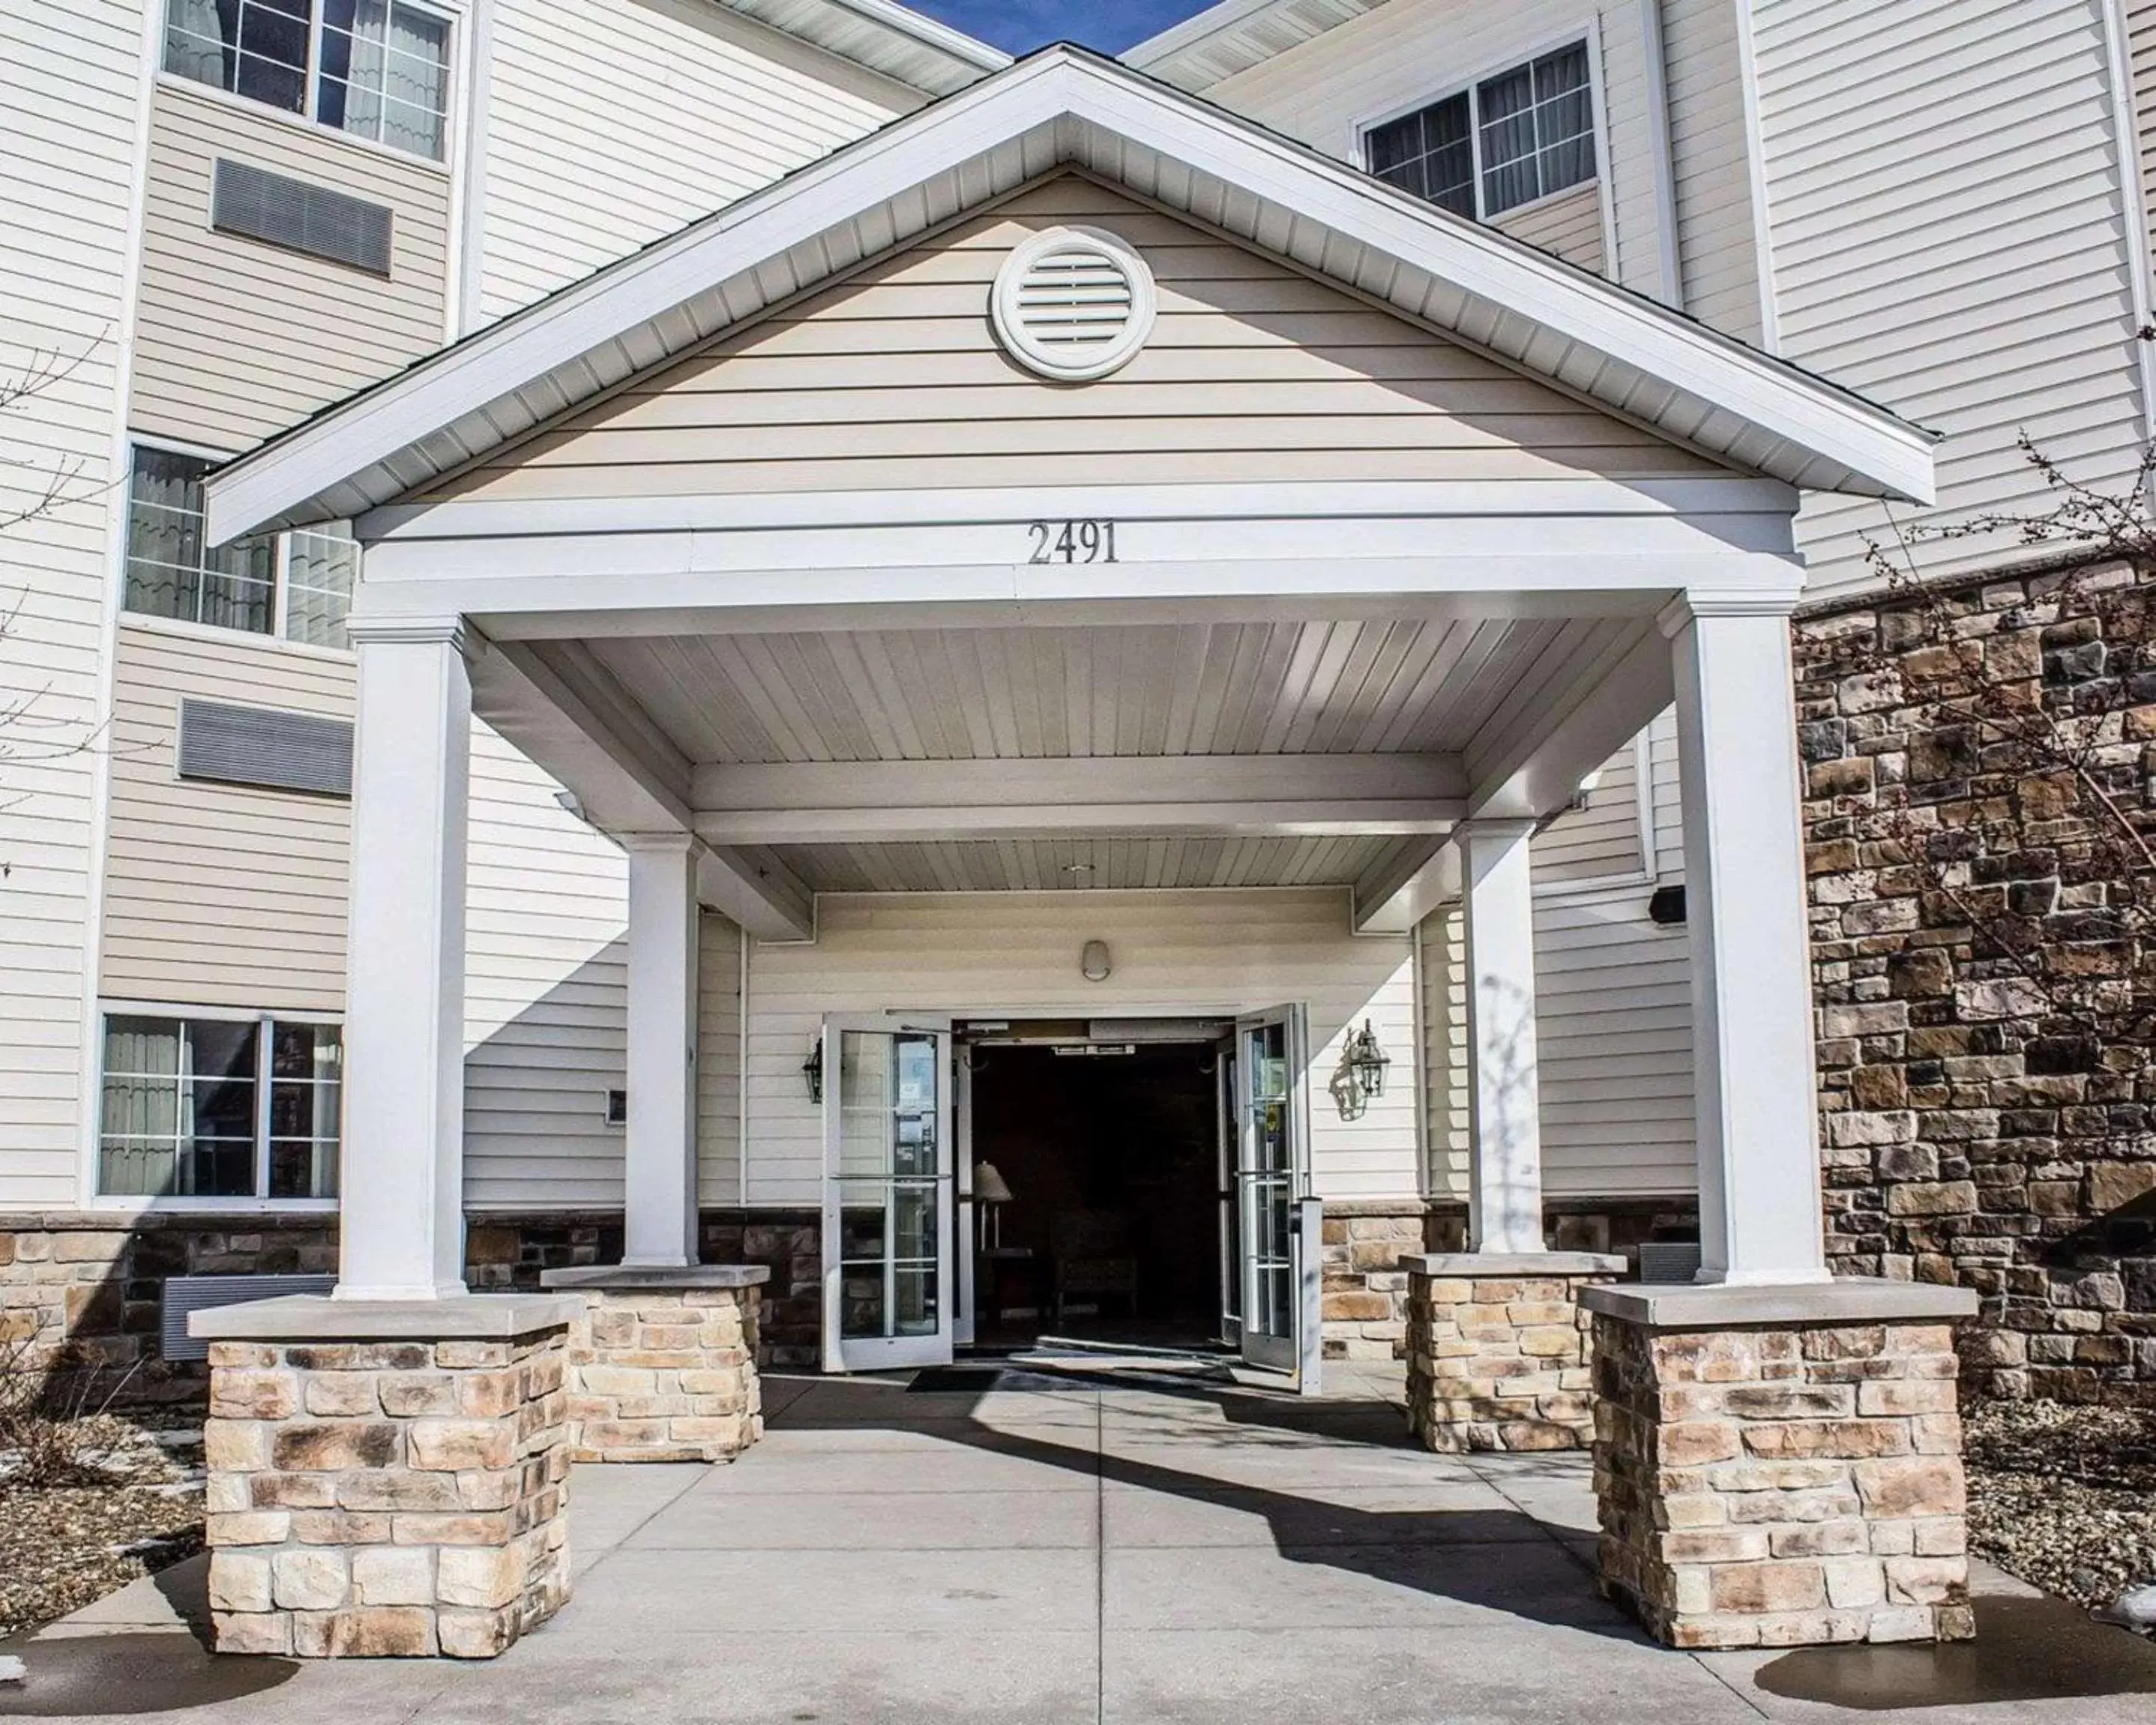 Property building in MainStay Suites Coralville - Iowa City